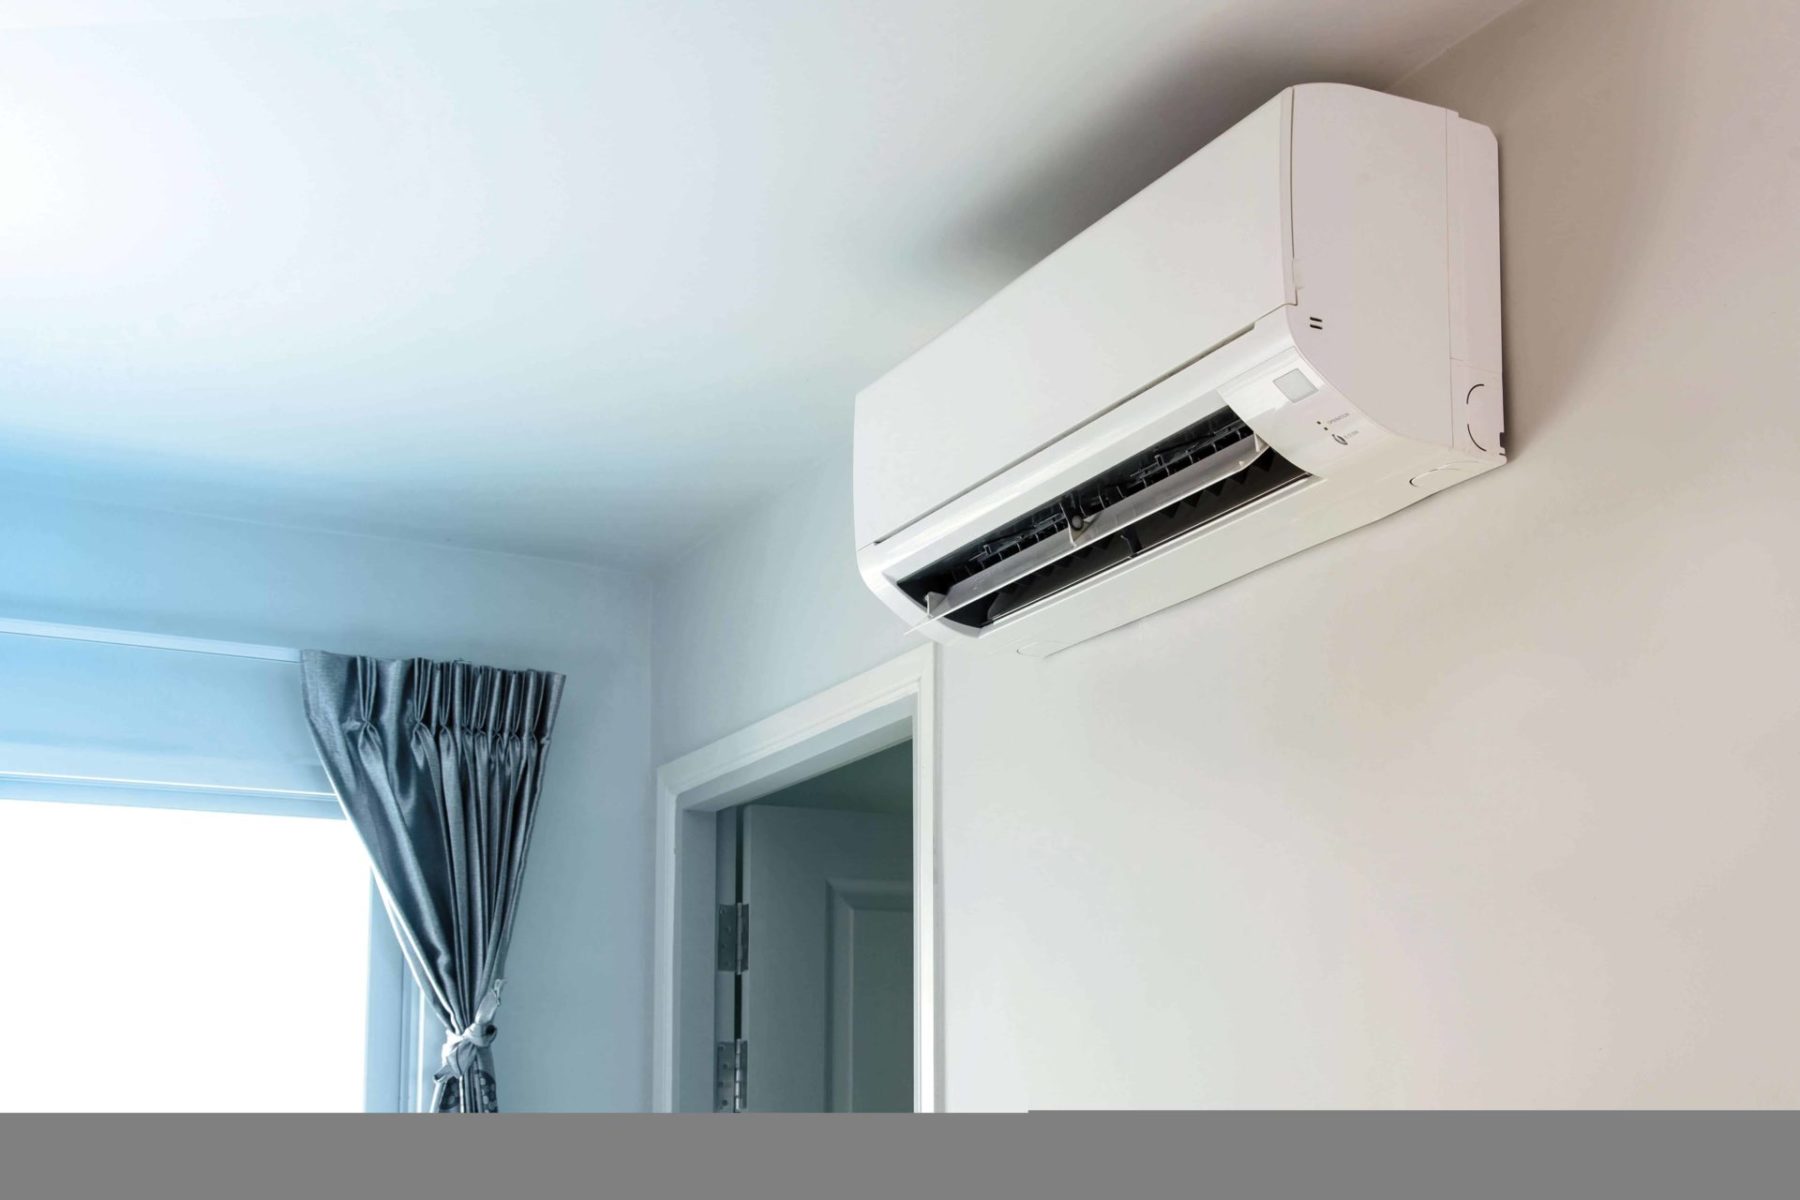 8 Summer Maintenance Tips for a homeowners Air Conditioning System